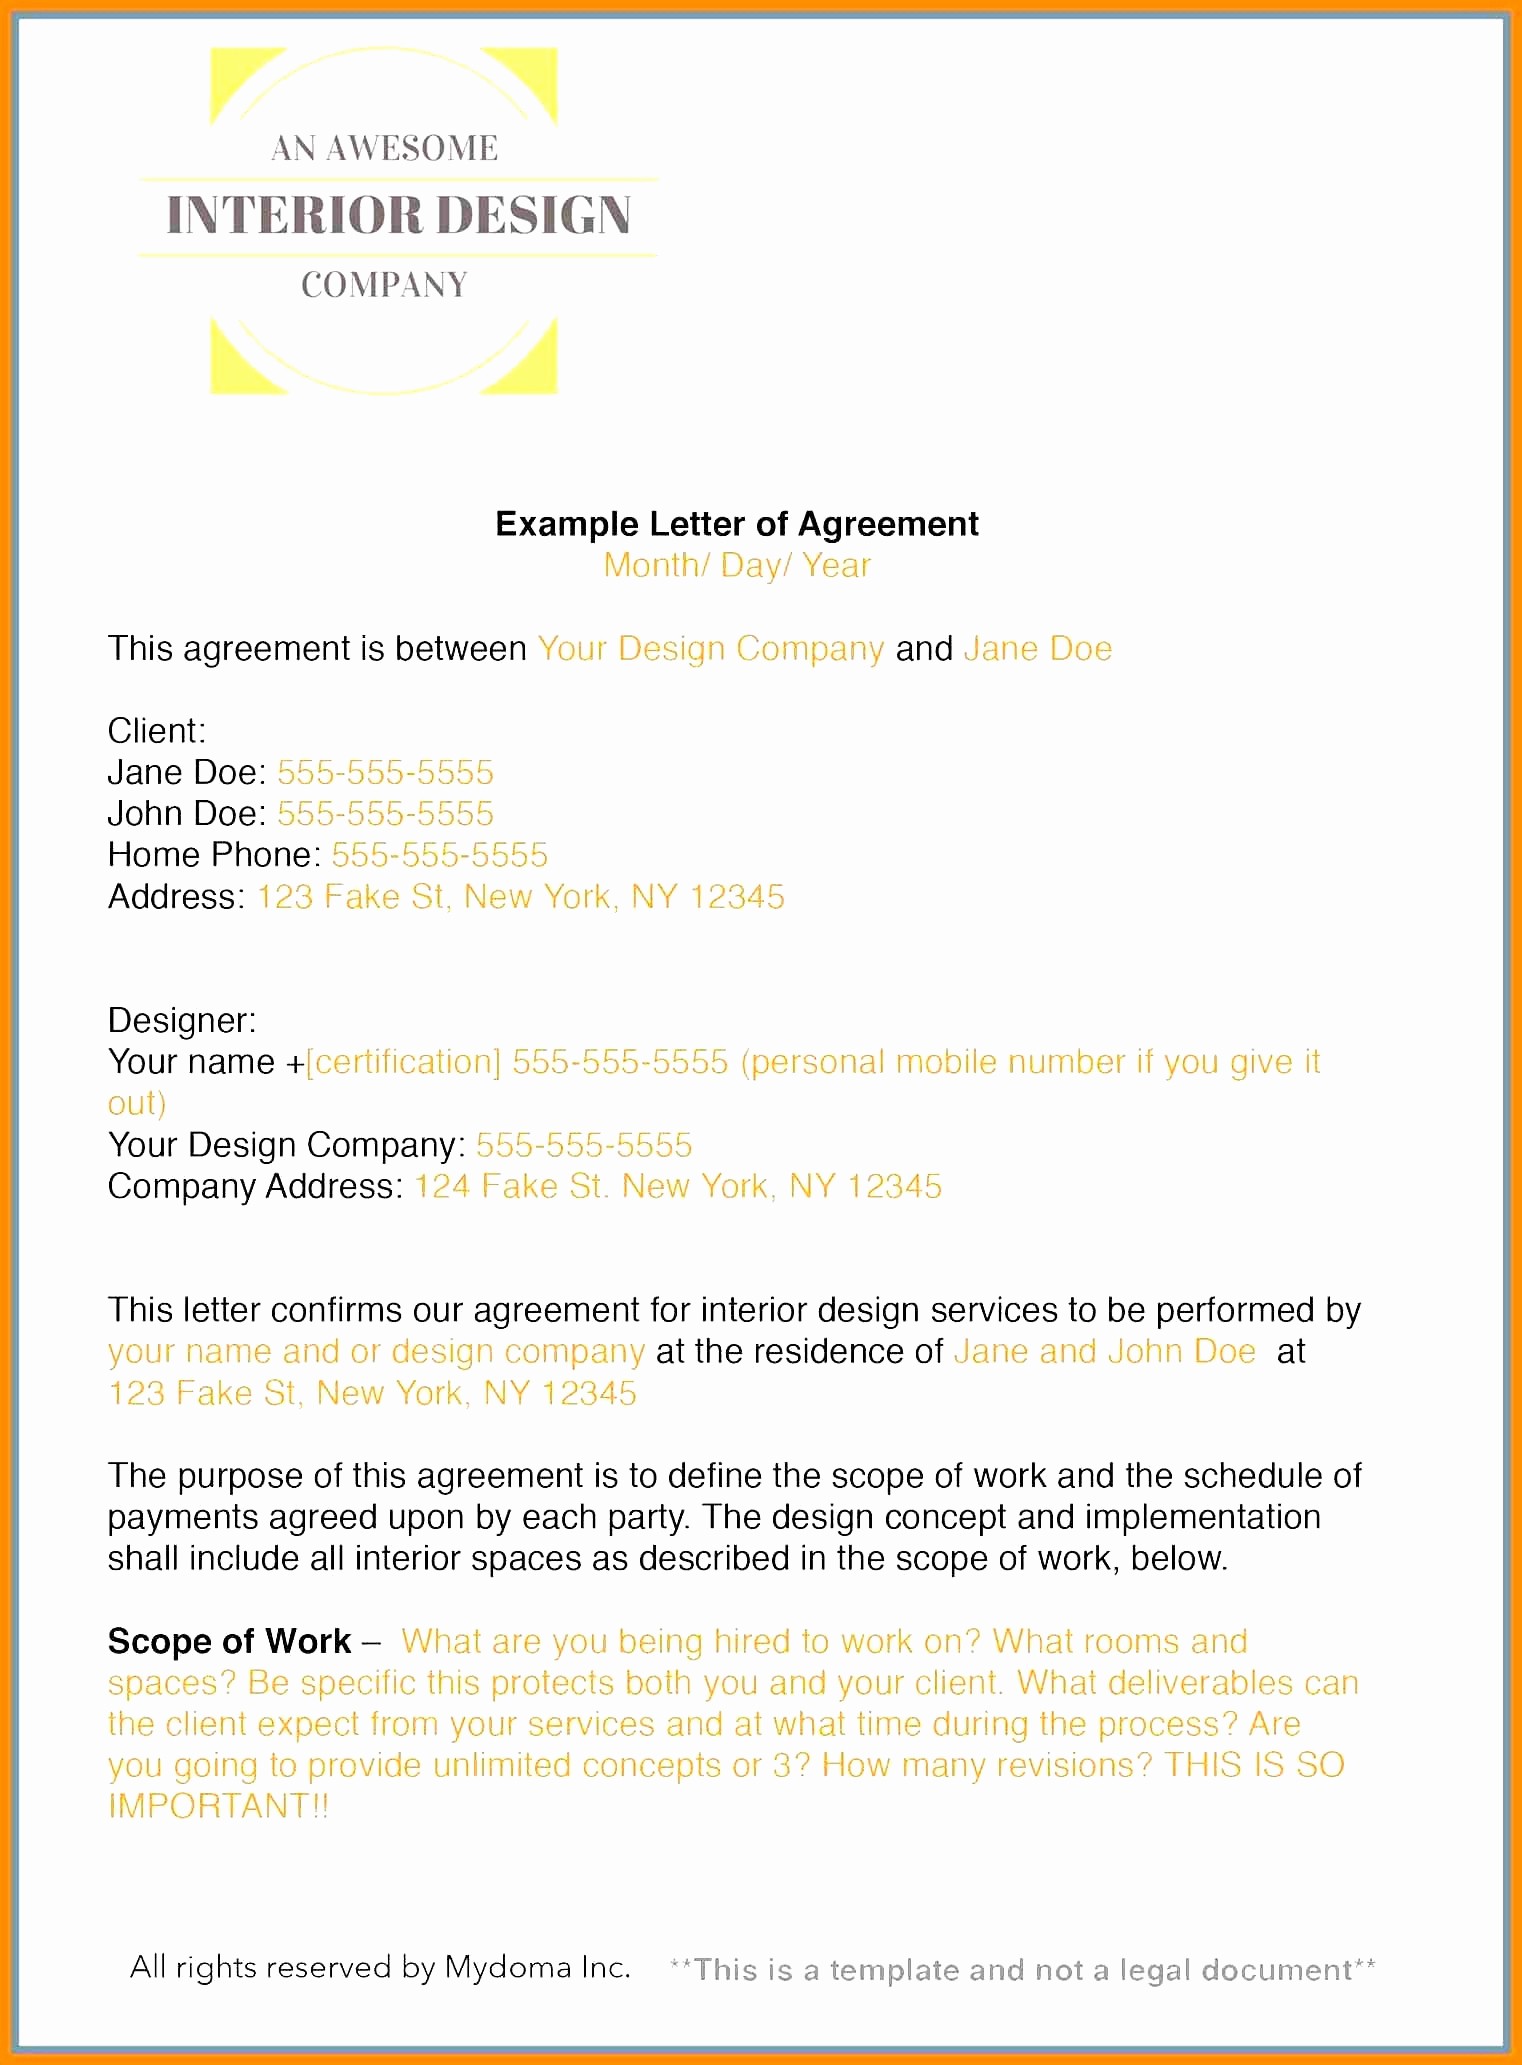 50 Beautiful Interior Design Contract Letter Of Agreement